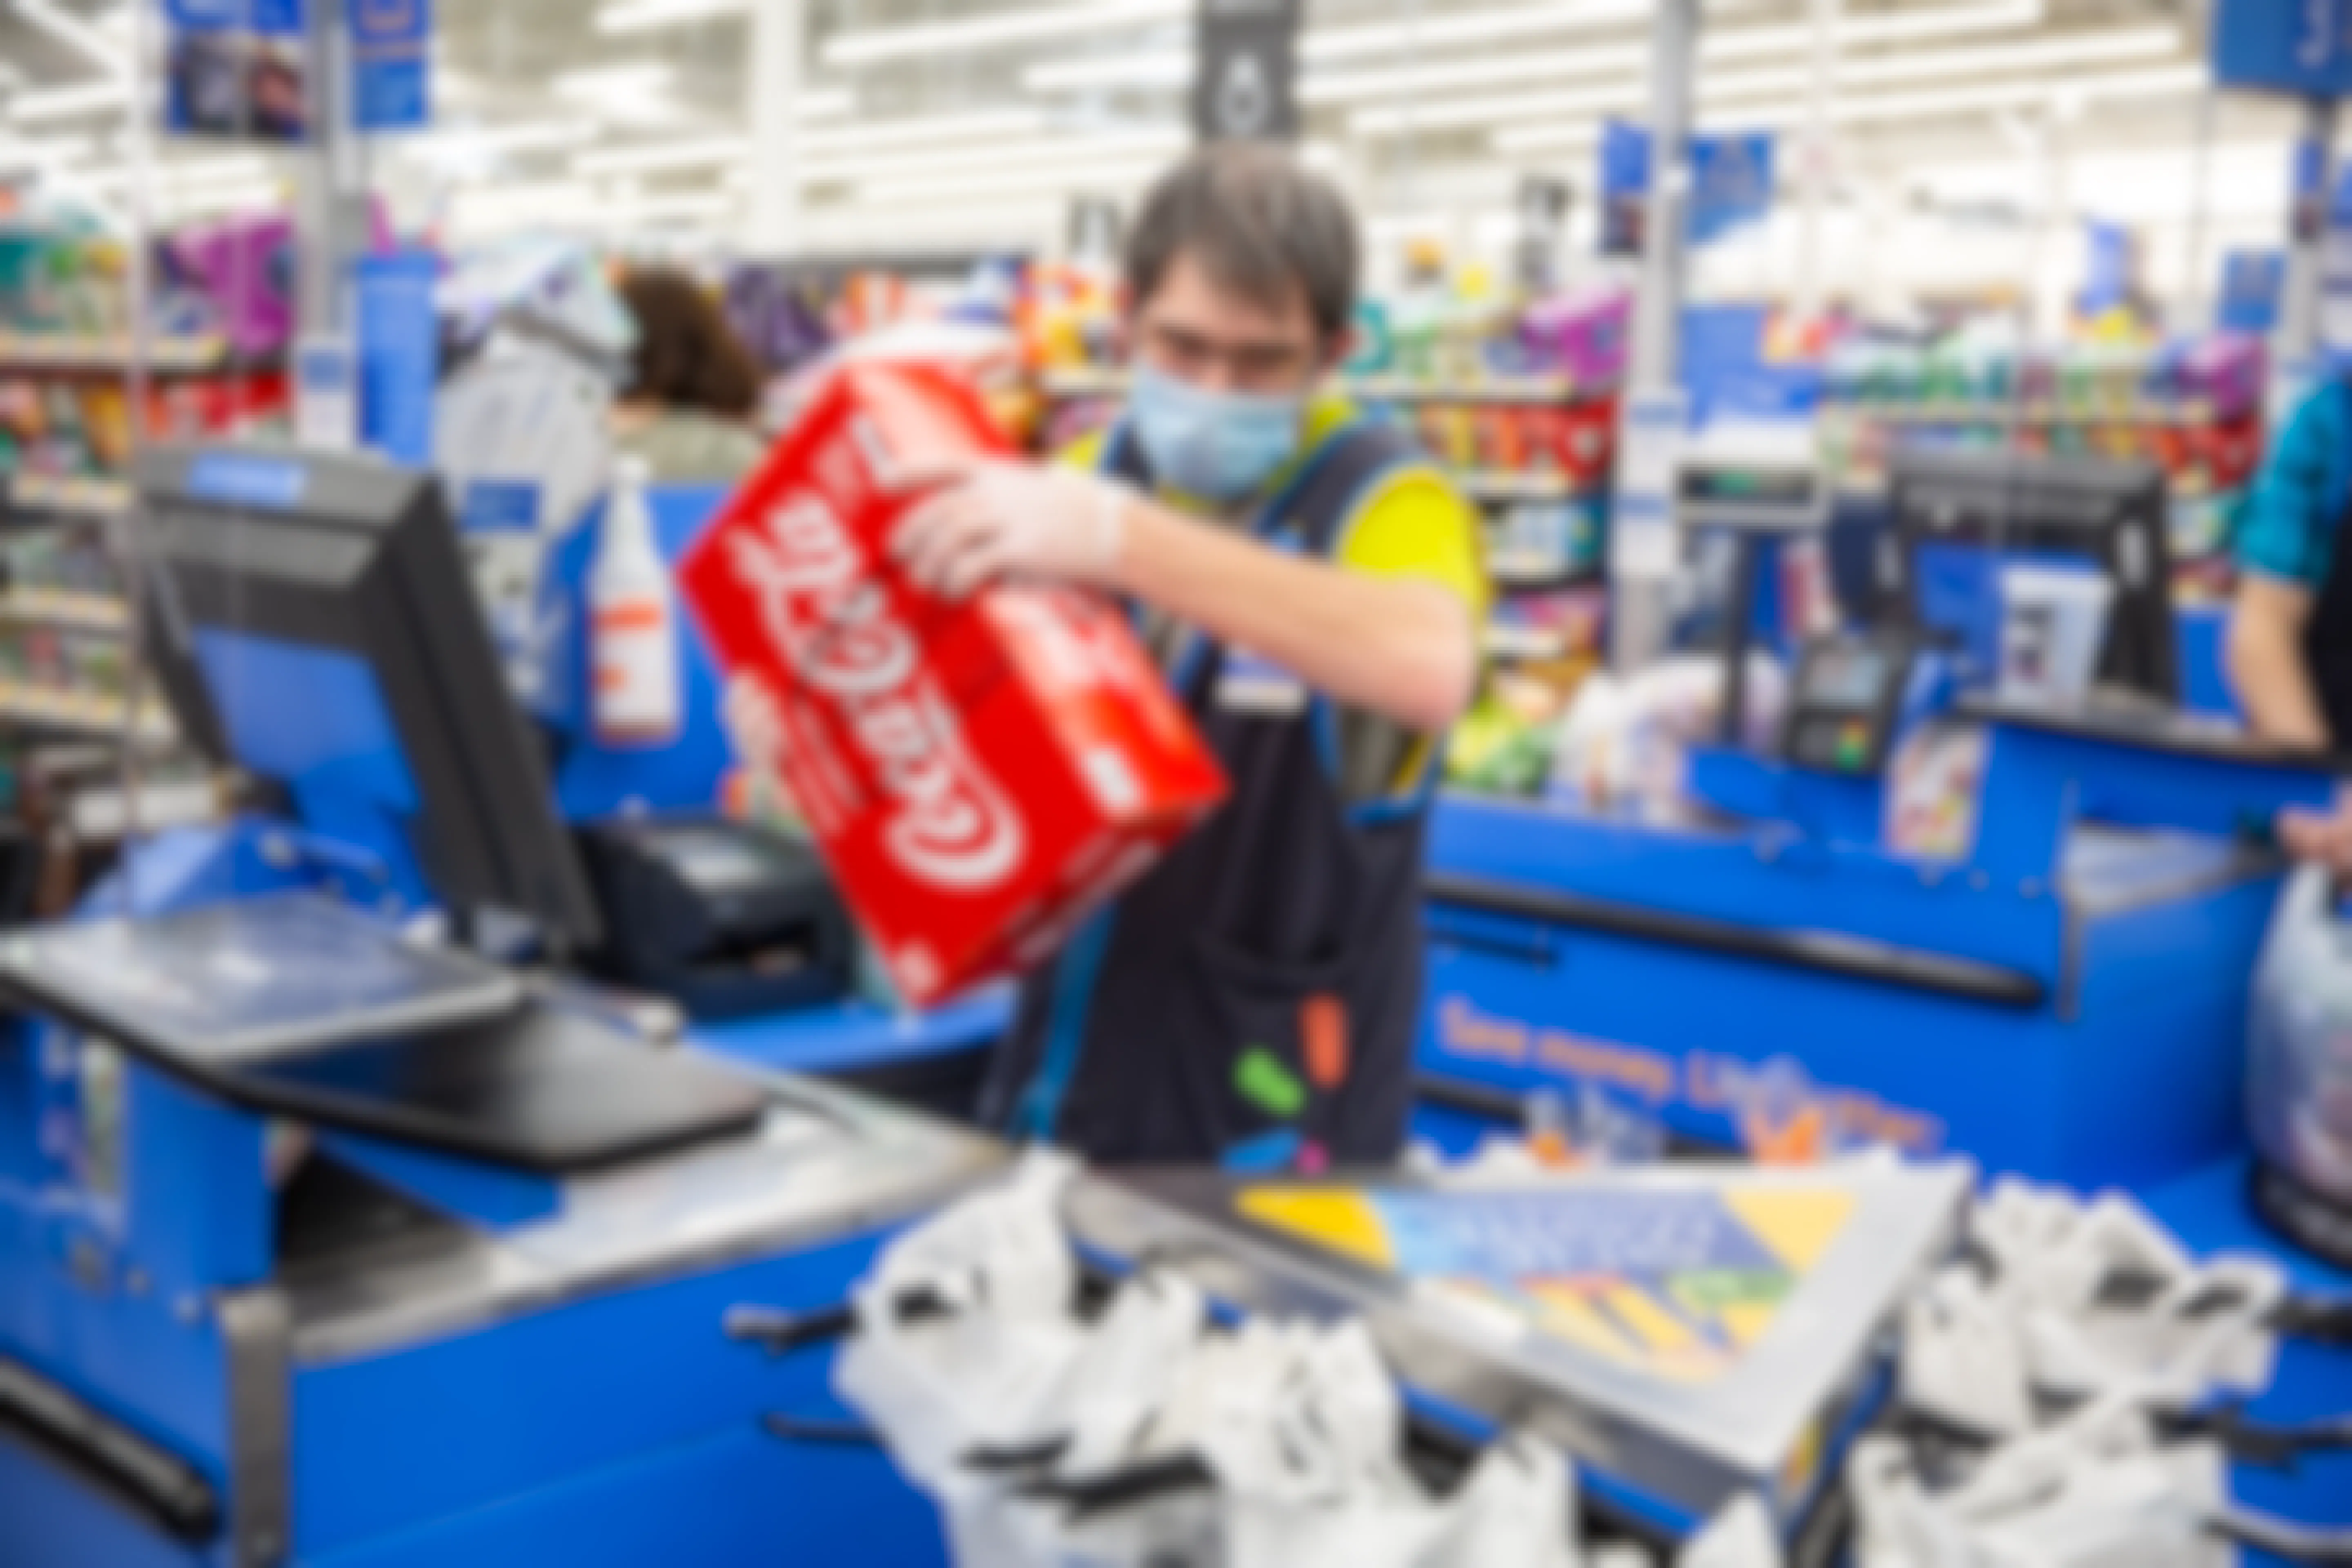 Walmart Employee wearing a mask and gloves ringing up a case of Coke at checkout.